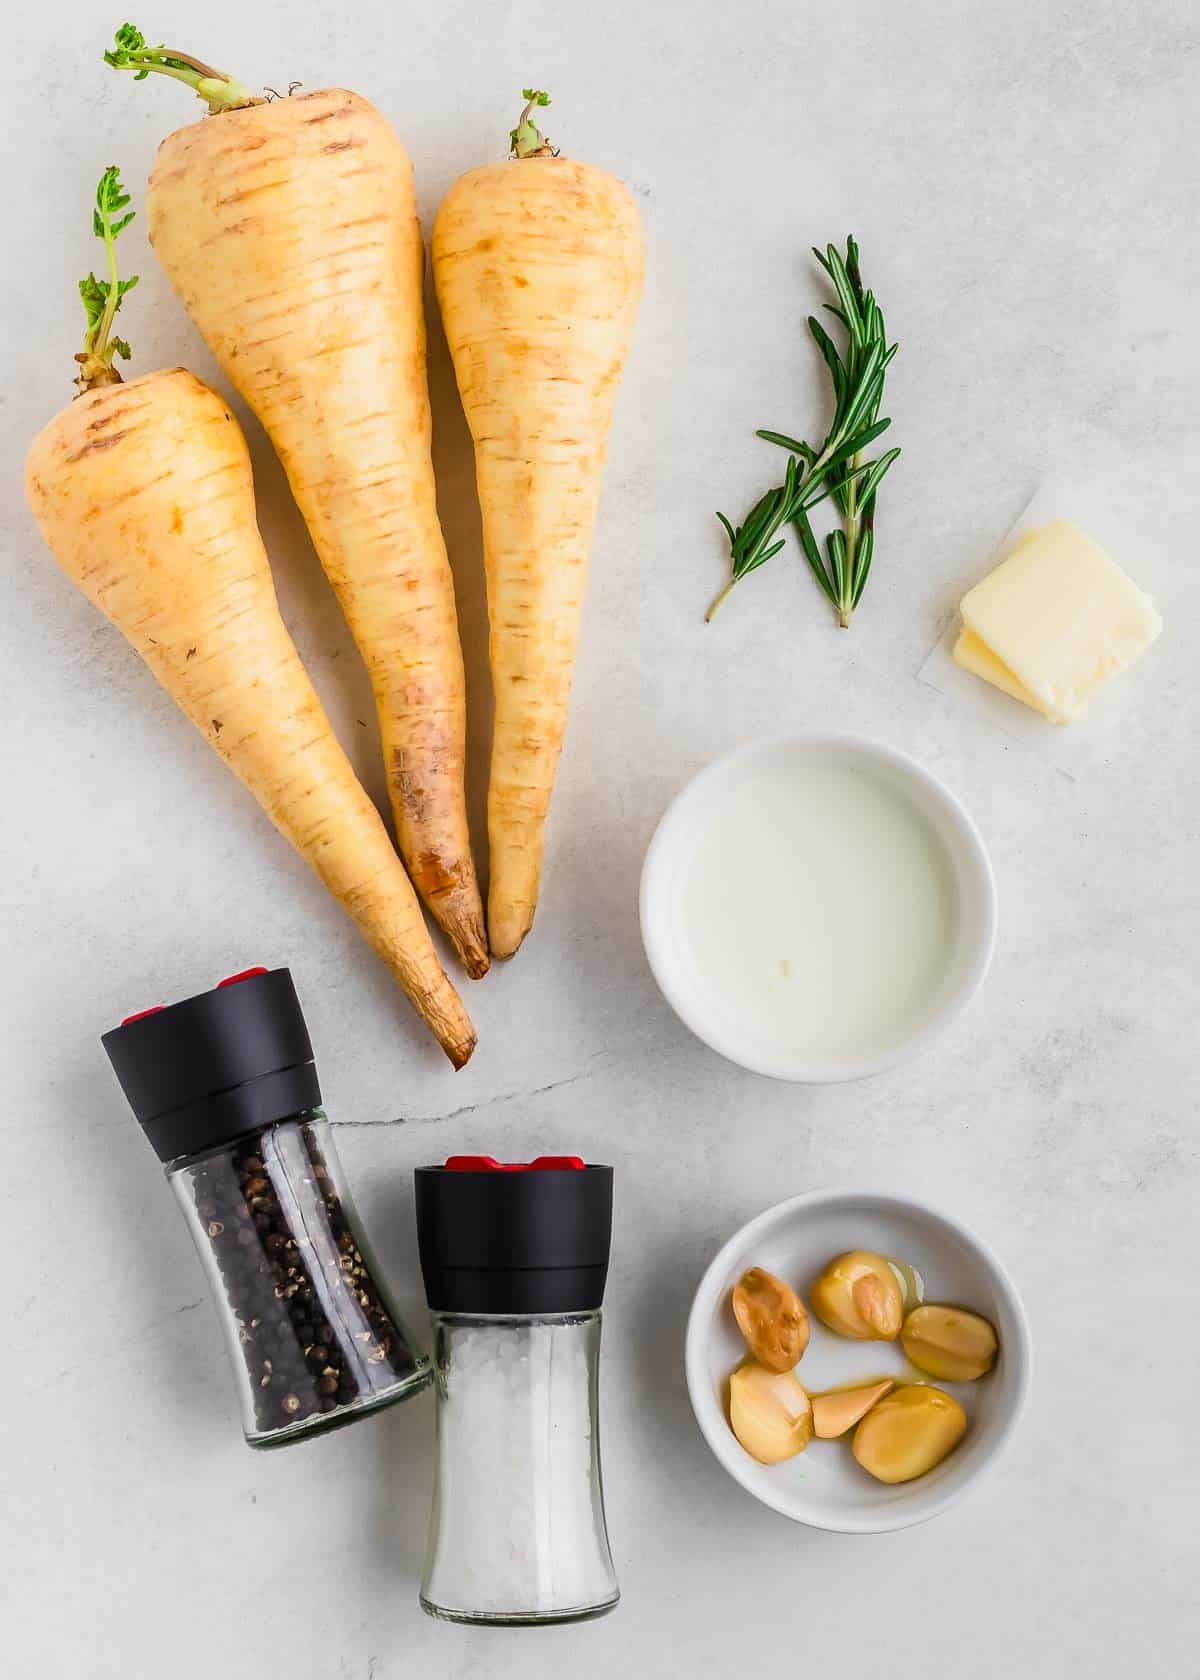 Fresh ingredients for cooking parsnips, herbs, garlic, butter, milk, salt, and pepper on a kitchen countertop.